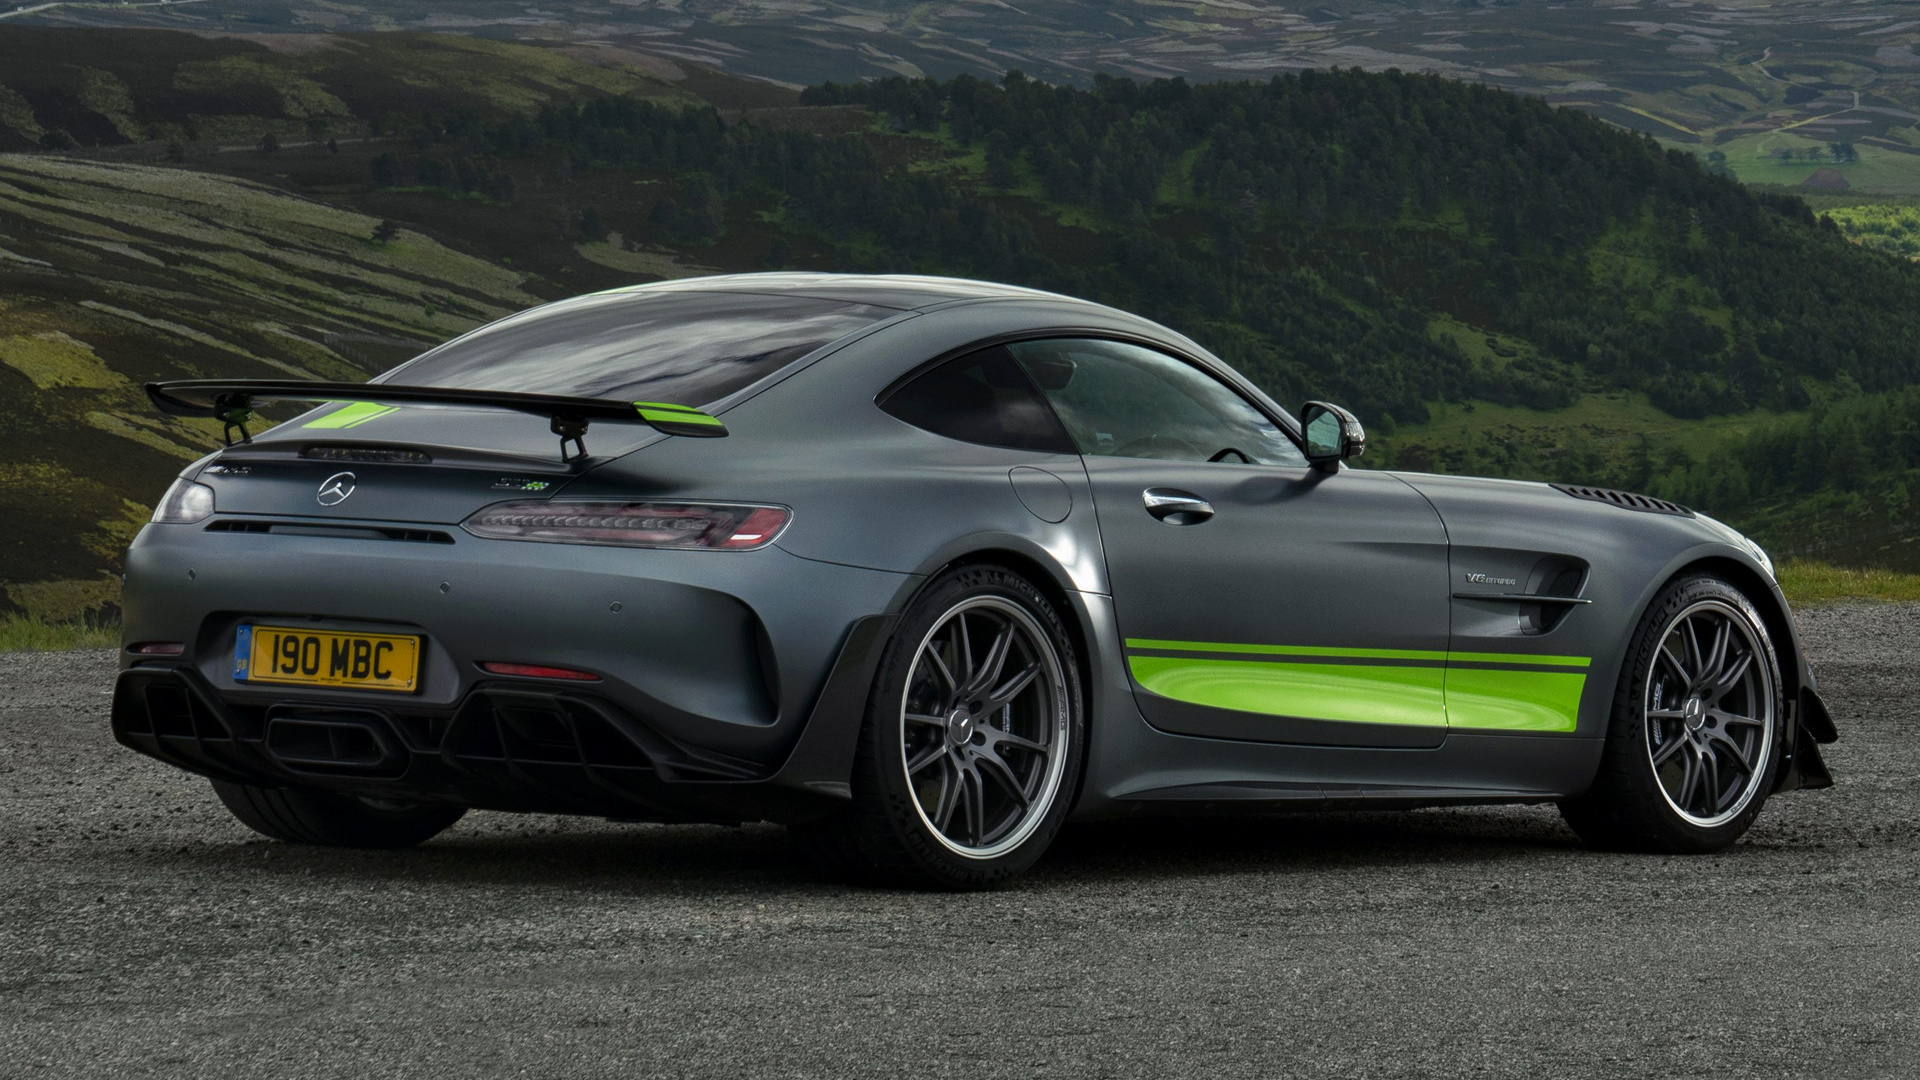  Mercedes Amg Gt R Pro HQ Background Wallpapers